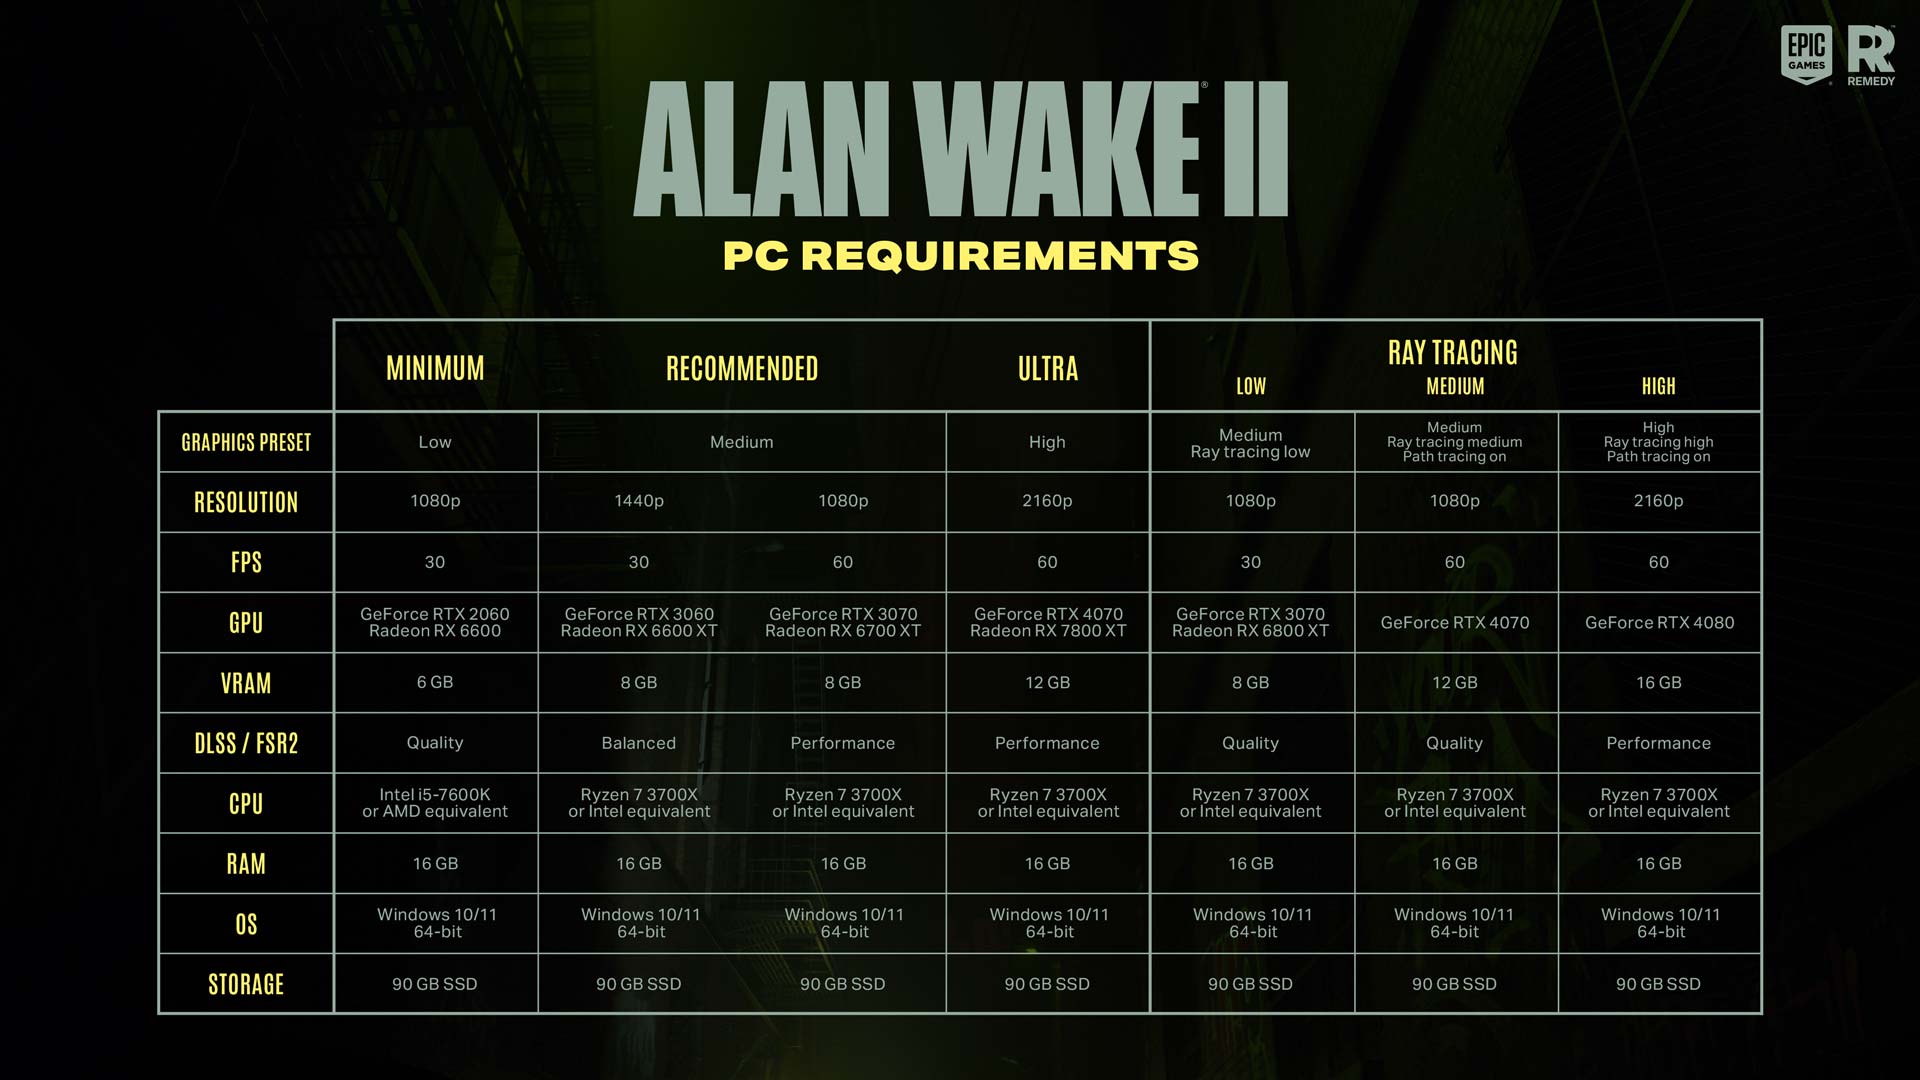 alan wake 2 reveals hefty pc requirements